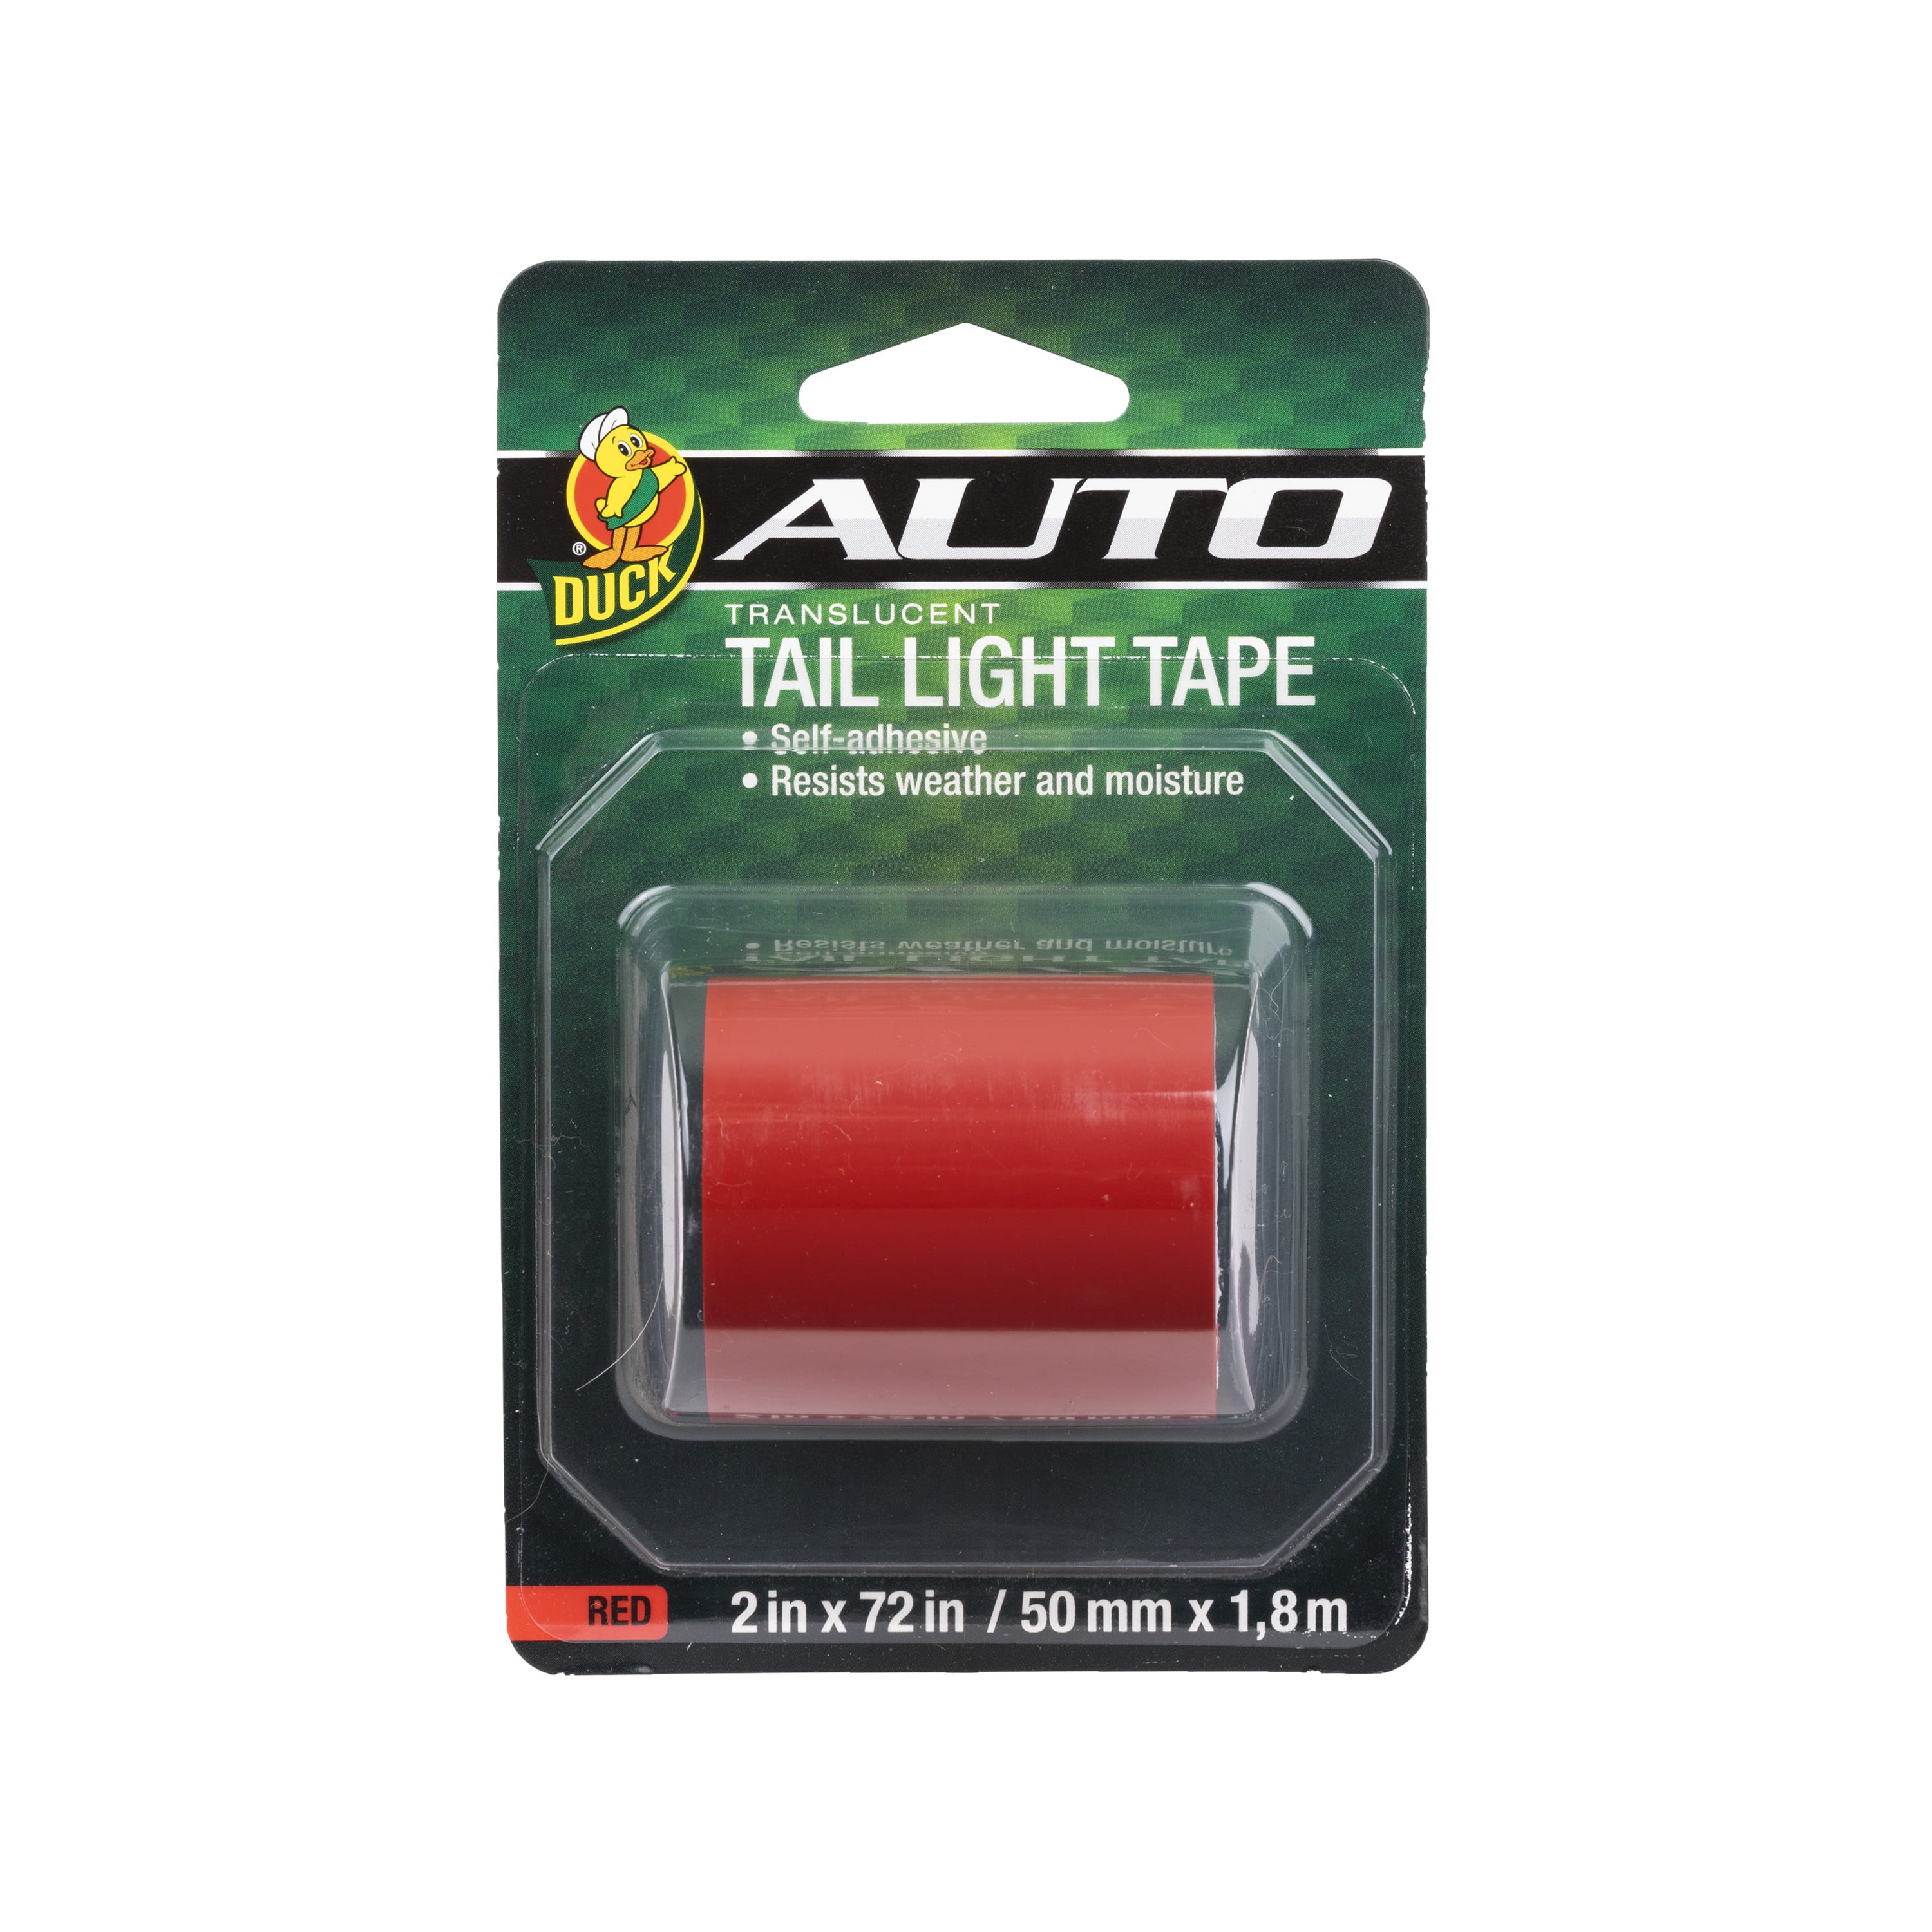 Duck Brand TRANSLUCENT TAIL LIGHT REPAIR TAPE RED Self Adhesive Water Resistant